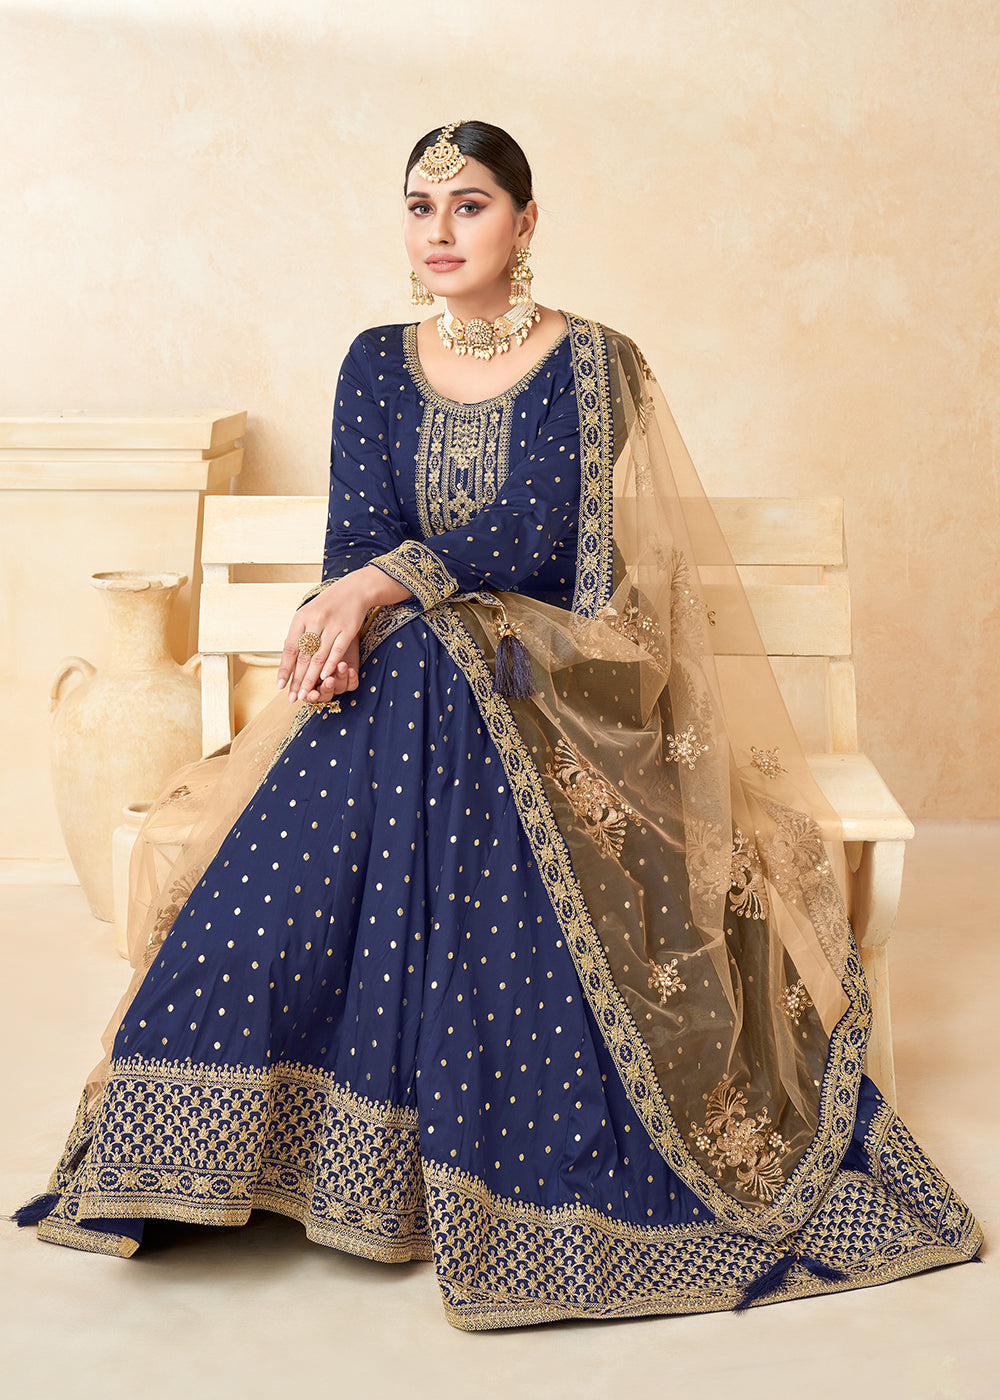 Buy Now Blue Silk Embroidered Indian Ethnic Wear Anarkali Dress Online in USA, UK, Australia, New Zealand, Canada & Worldwide at Empress Clothing.